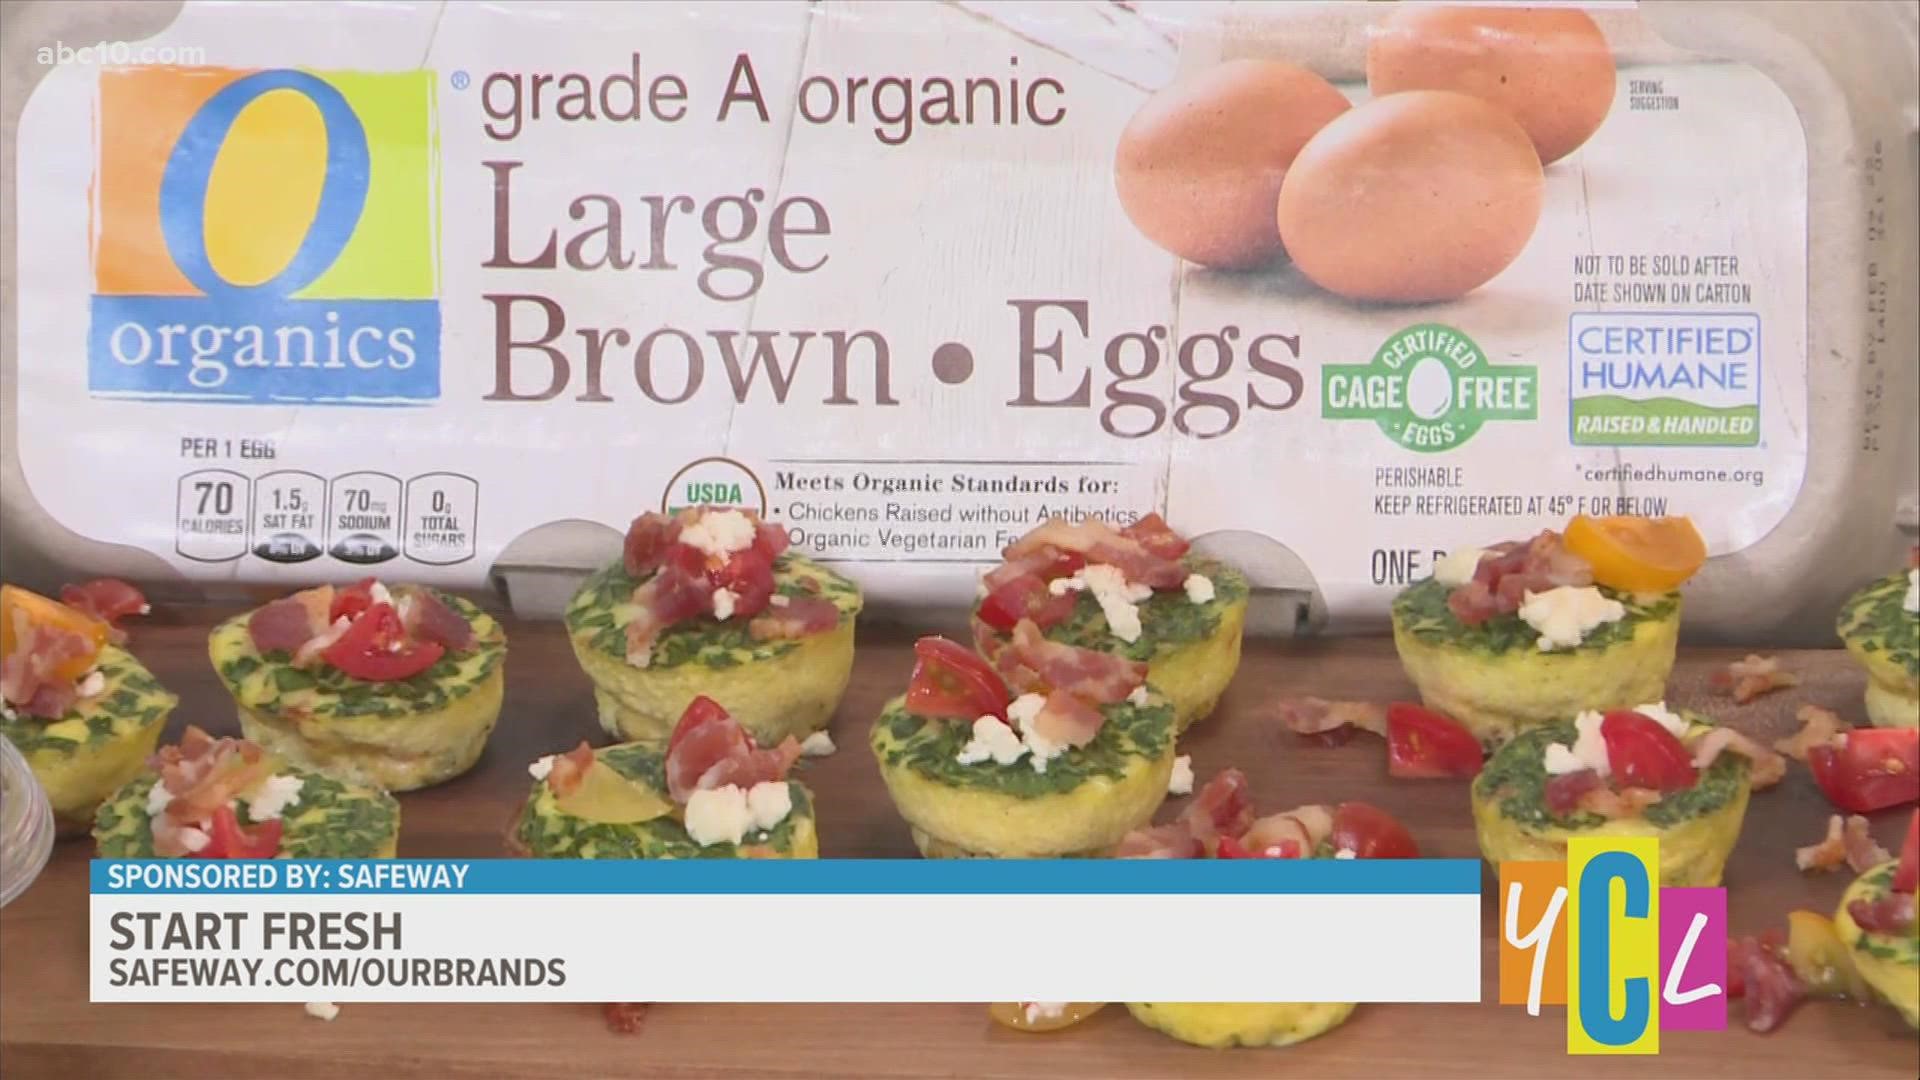 Start fresh for the new year with new, nutritious recipes to whip up for your loved ones. This segment paid for by Safeway.